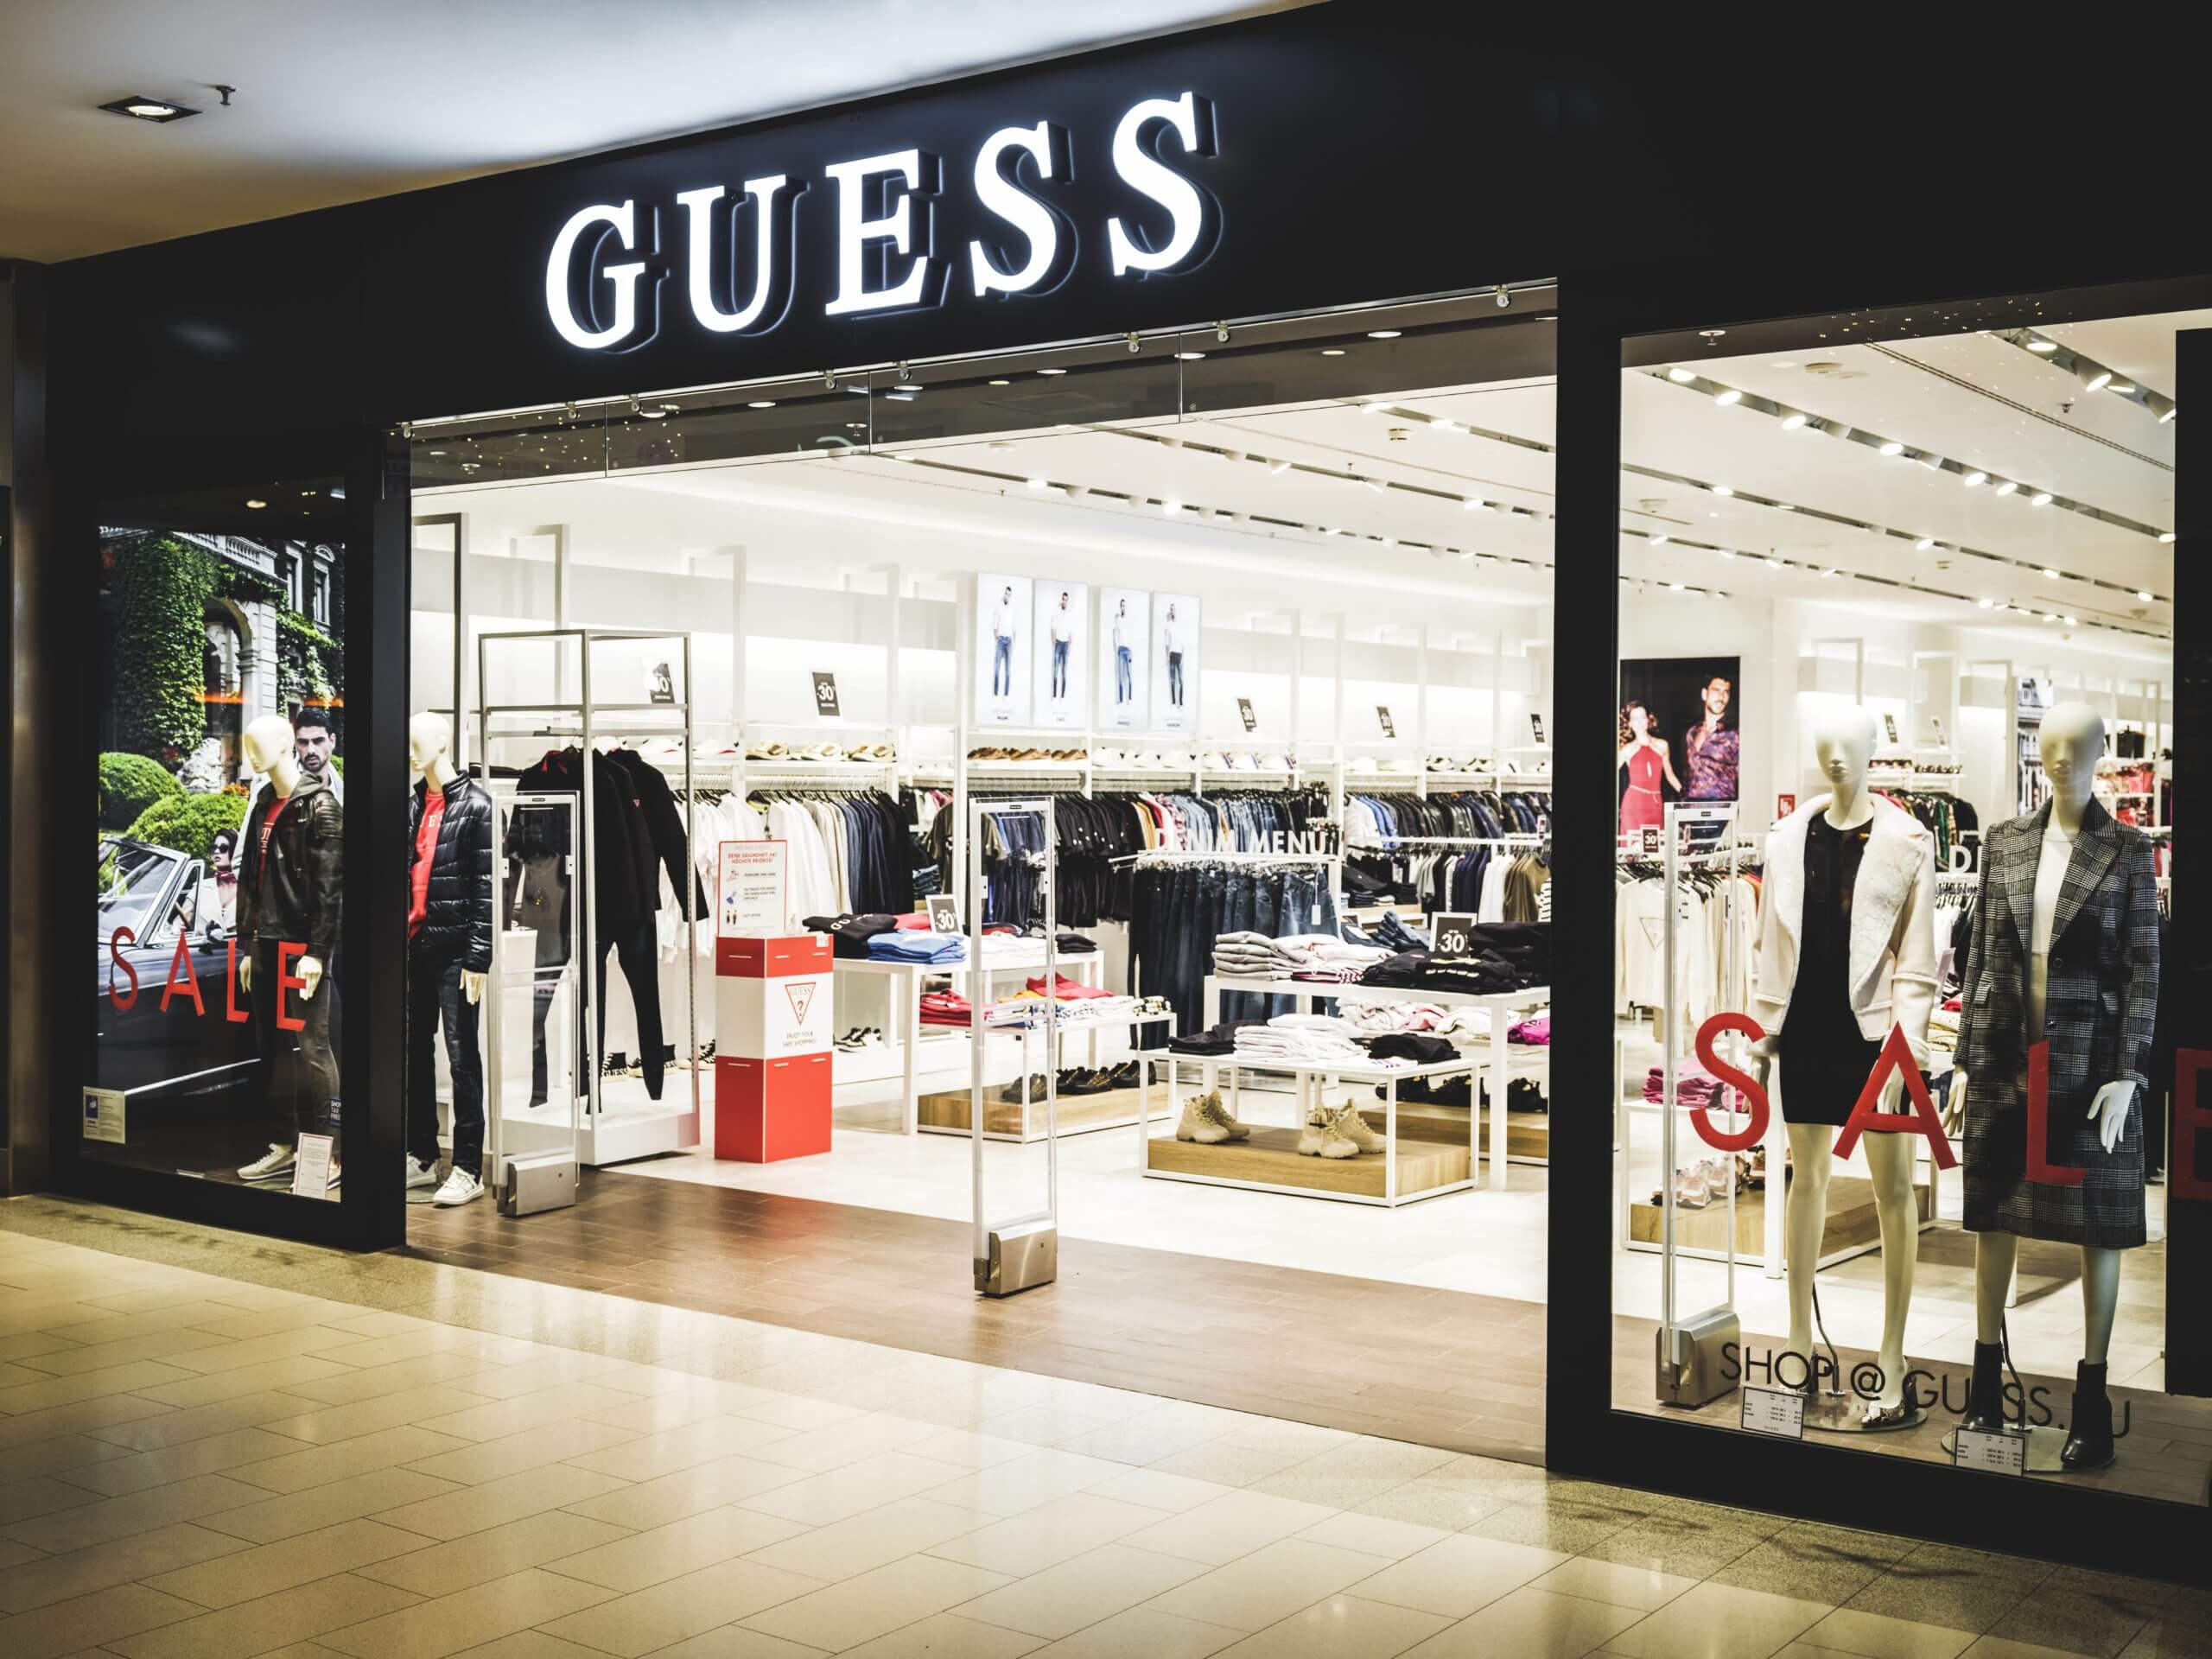 Guess shop front with window vinyls